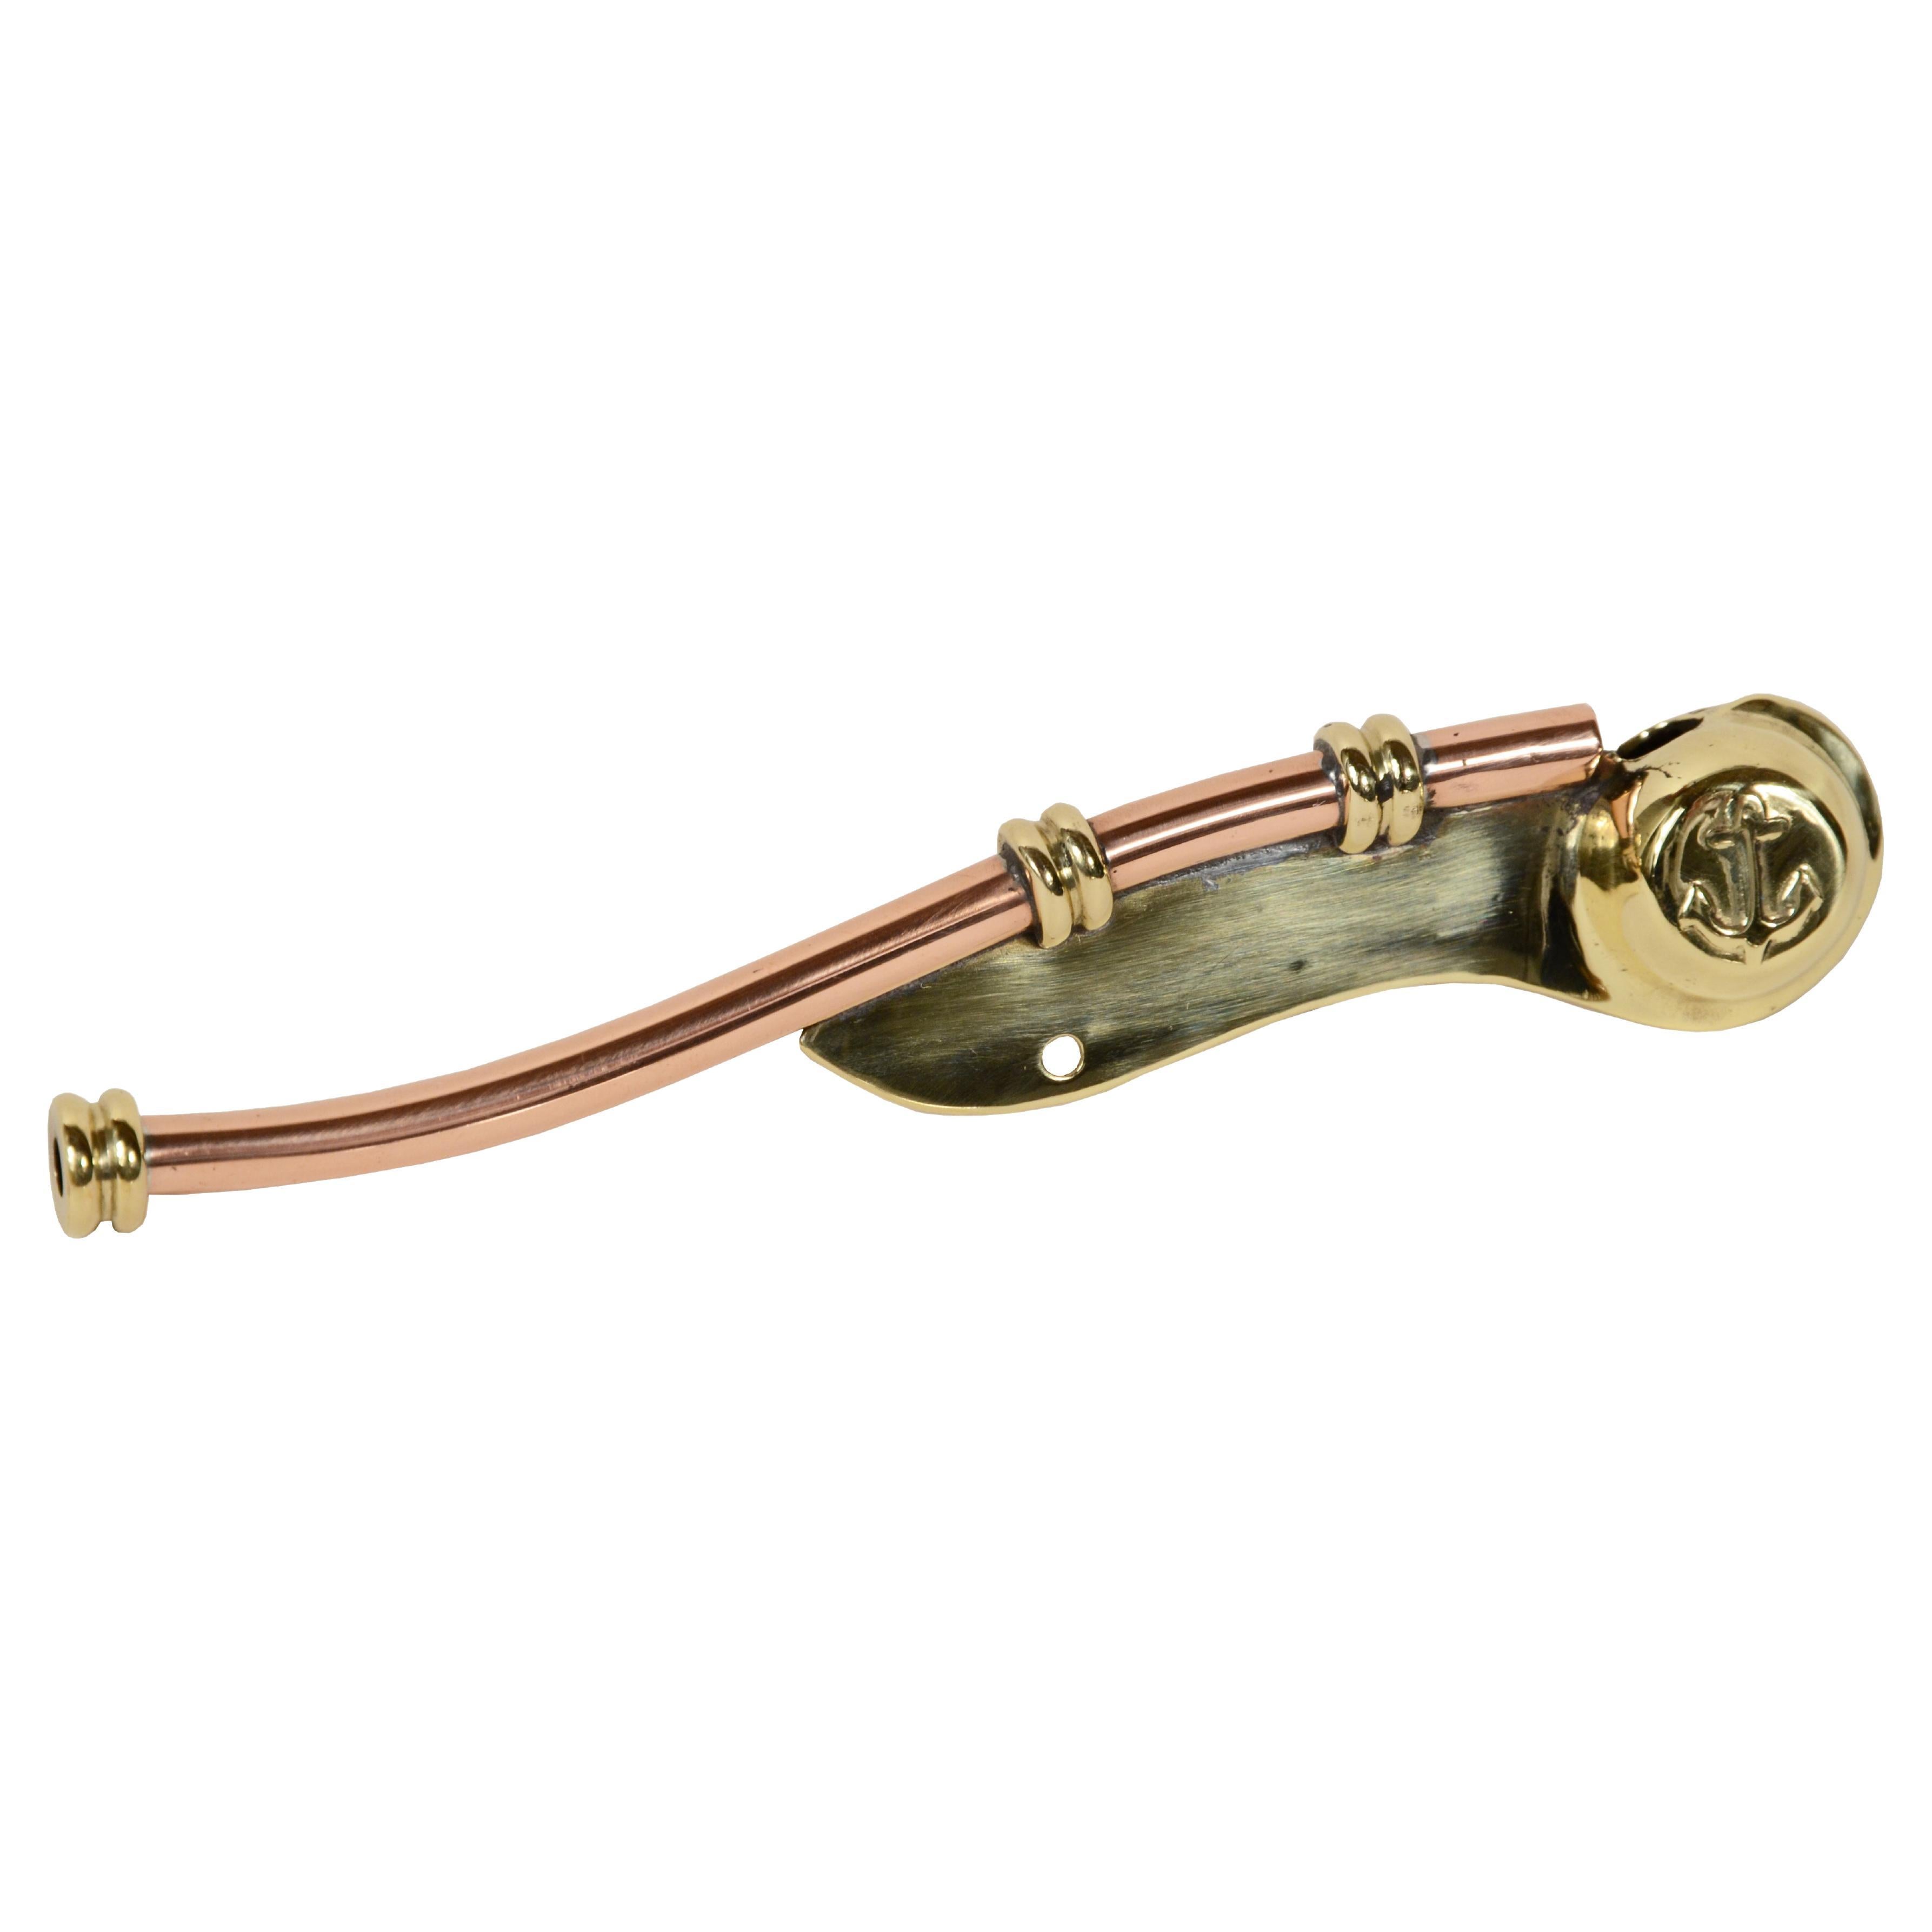 Boatswain's whistle in brass and copper English manufacture of the 1930s.